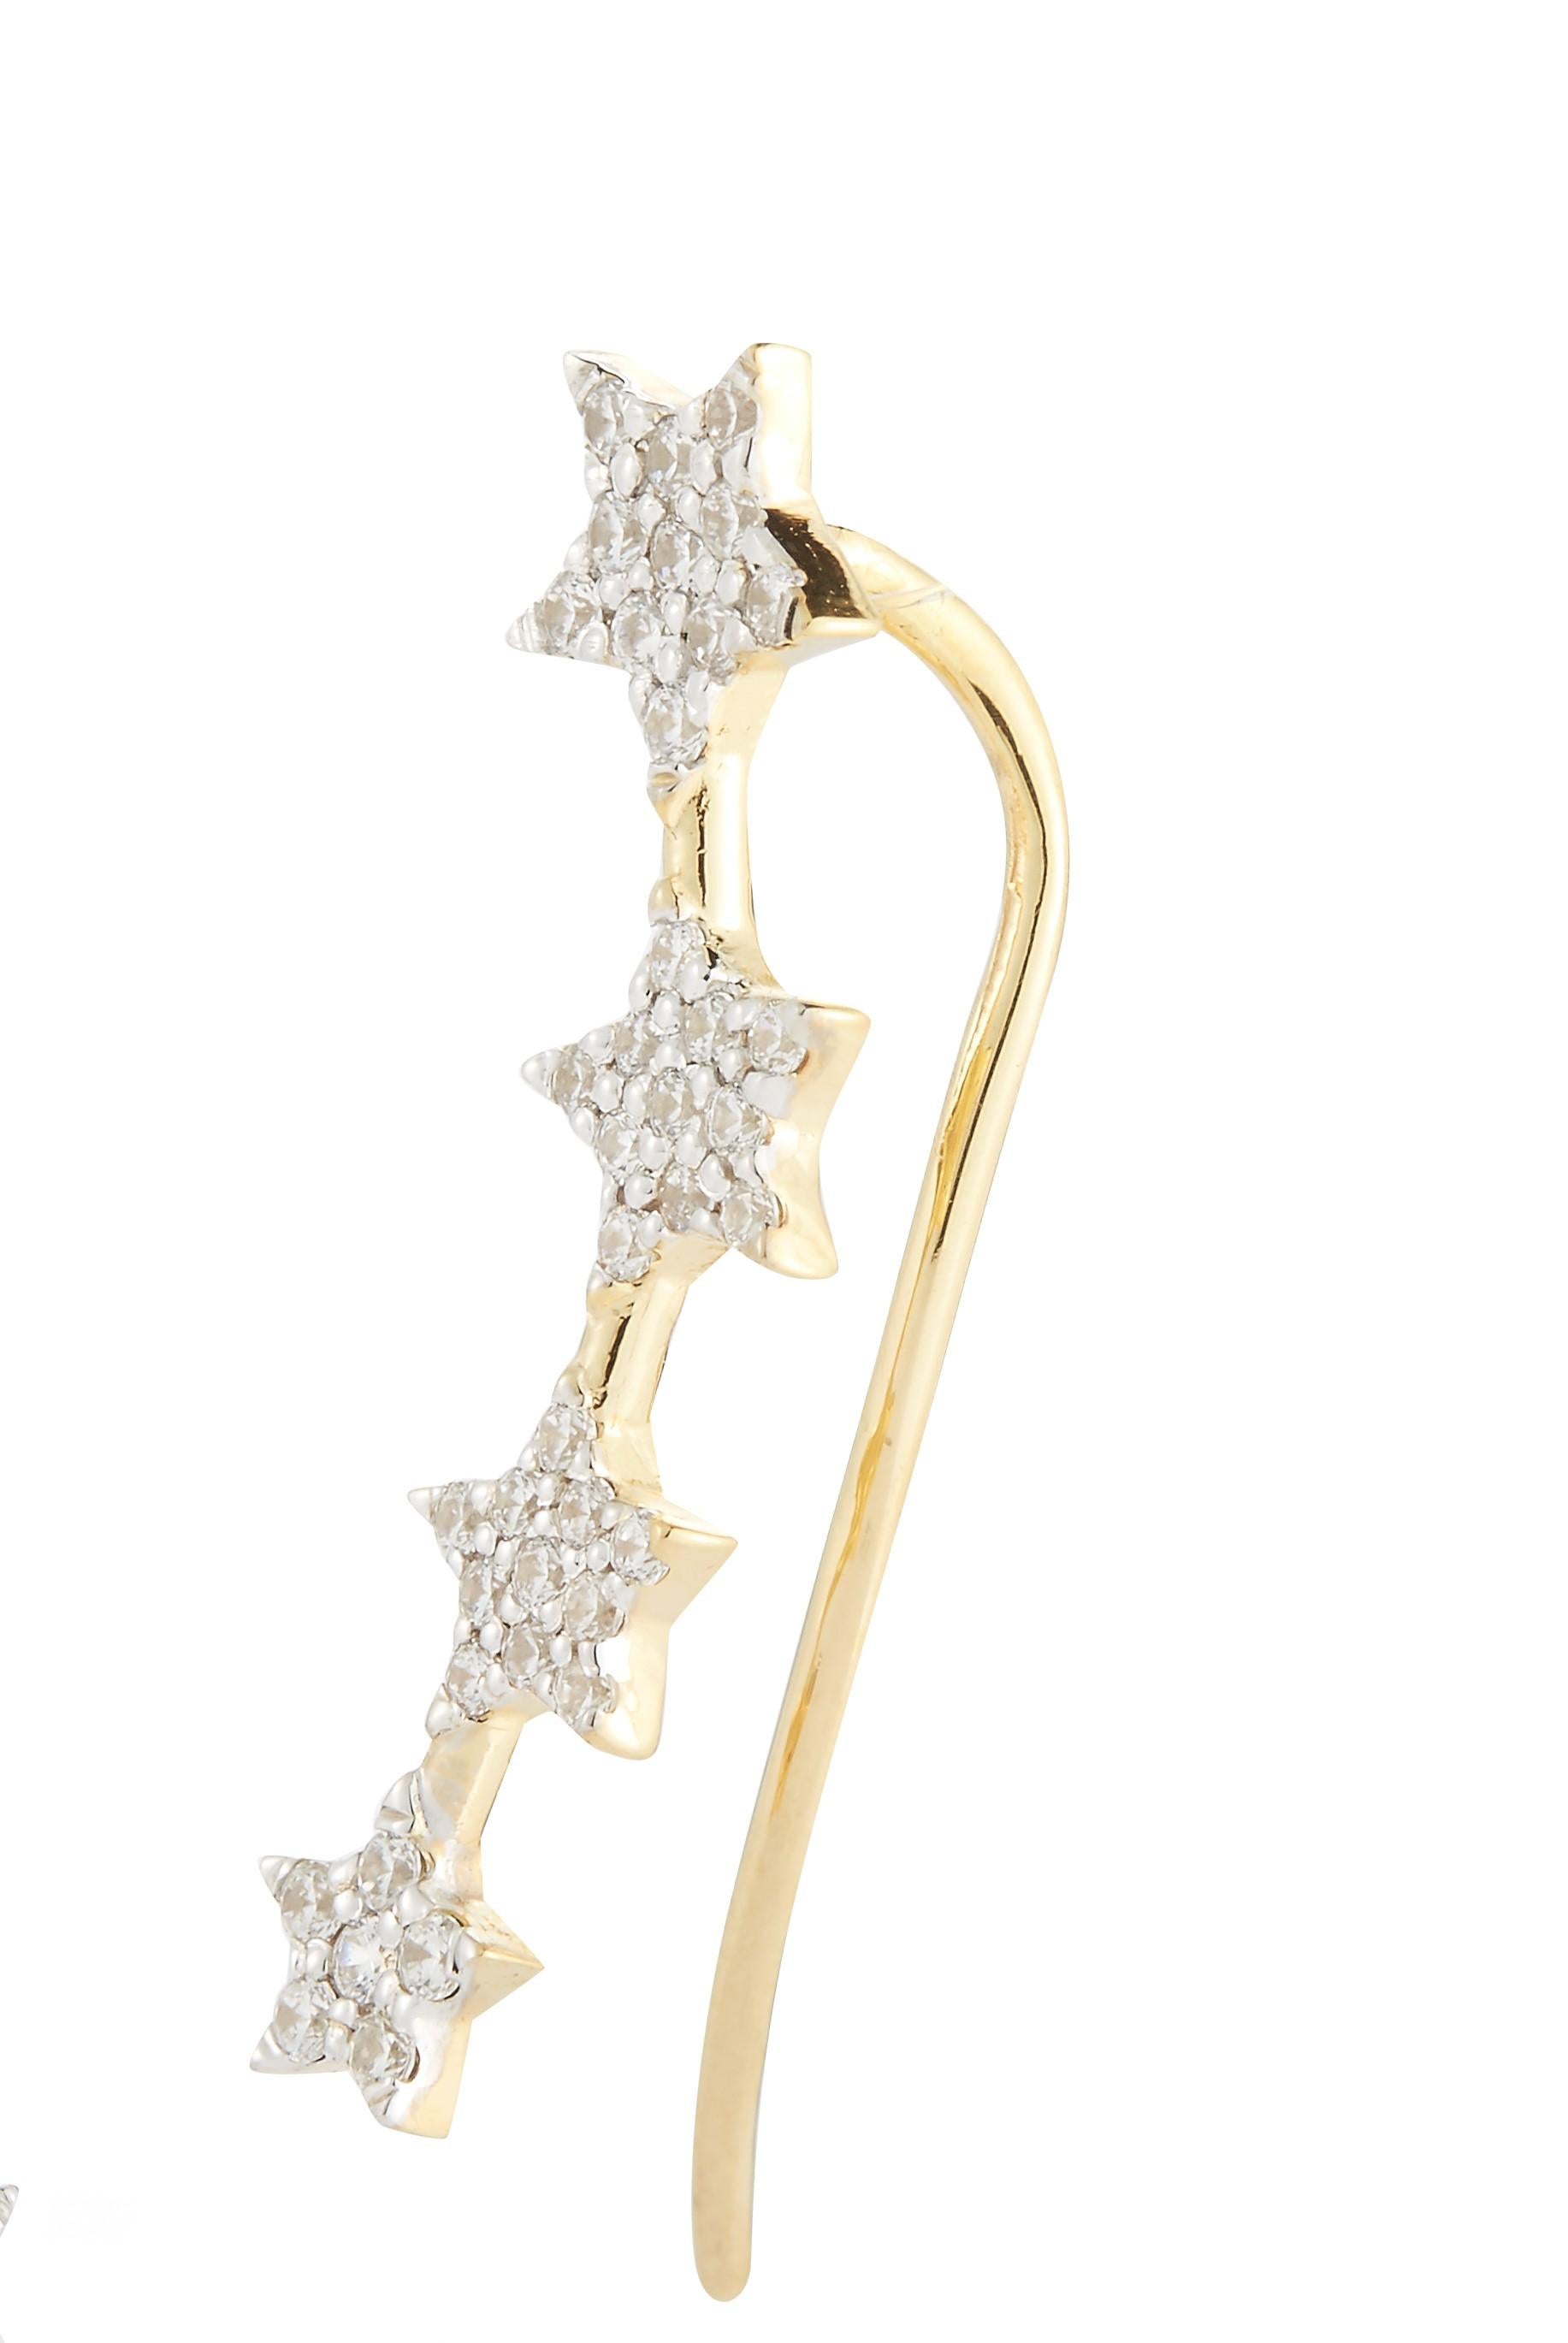 14 Karat Yellow Gold Hand-Crafted Polish-Finished Star Climber Earrings, Enhanced with 0.60 Carats of Graduating Diamond Stars.
